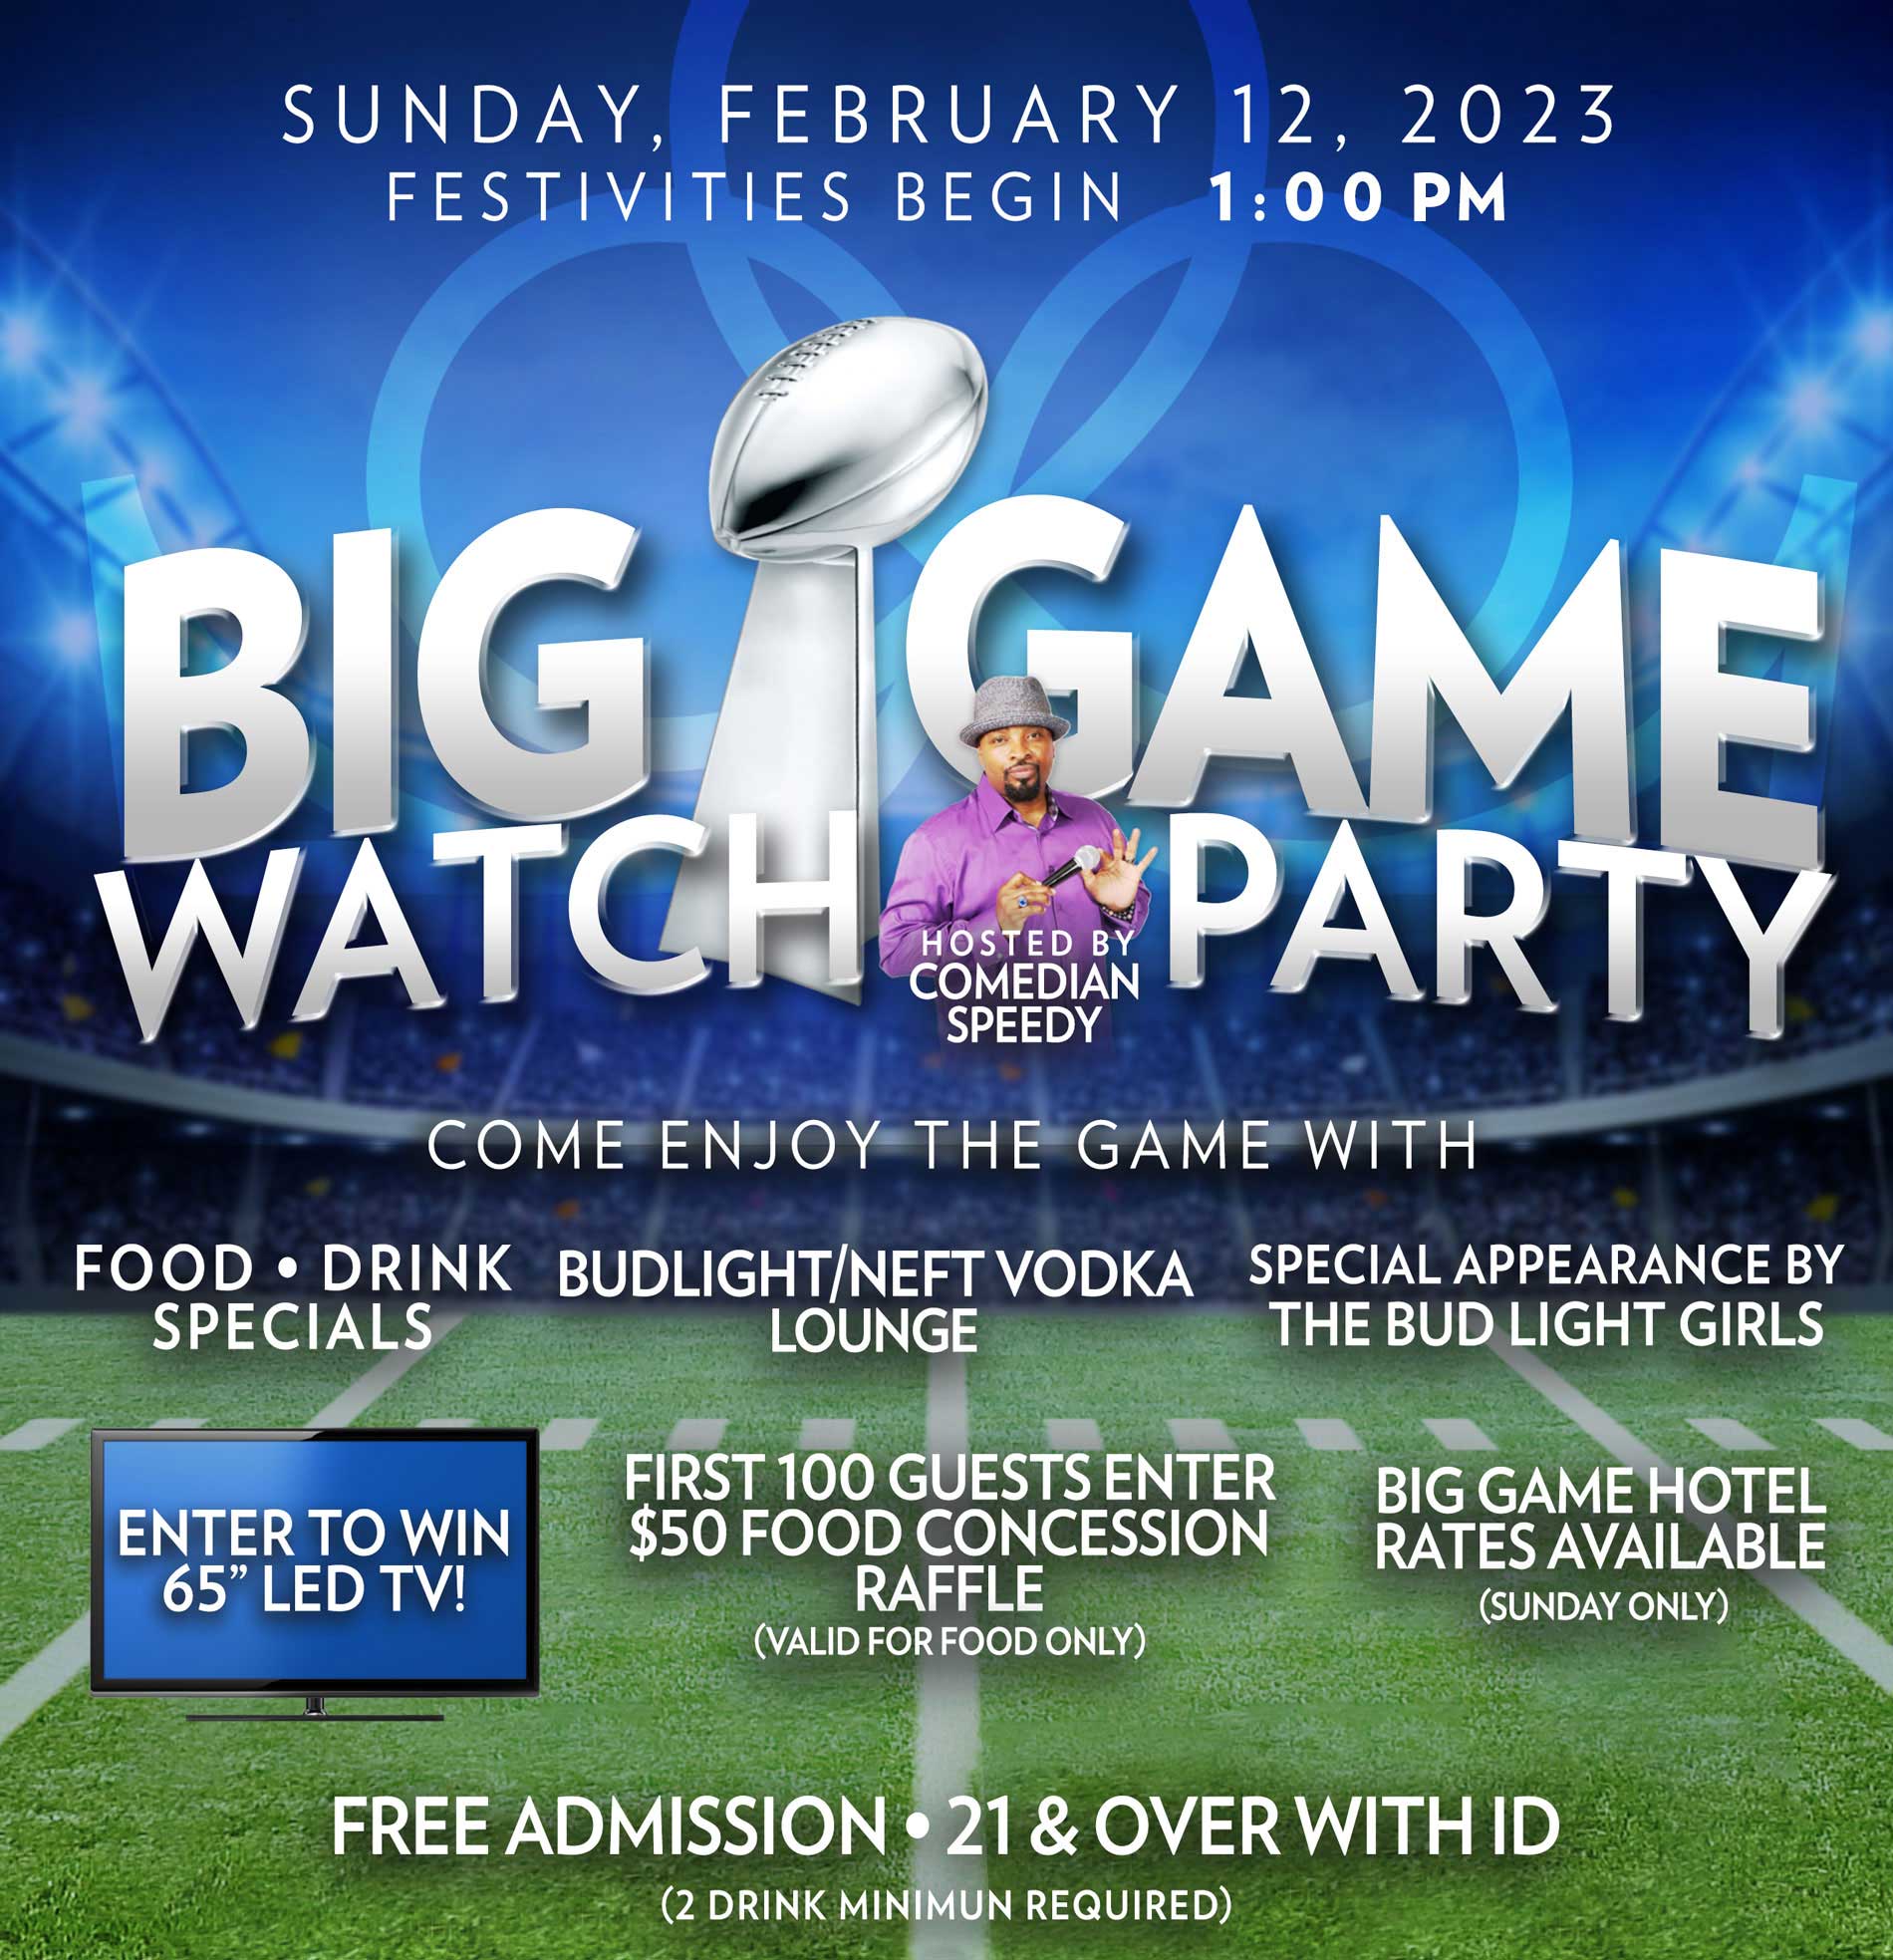 The Big Game Viewing Party at The Commerce